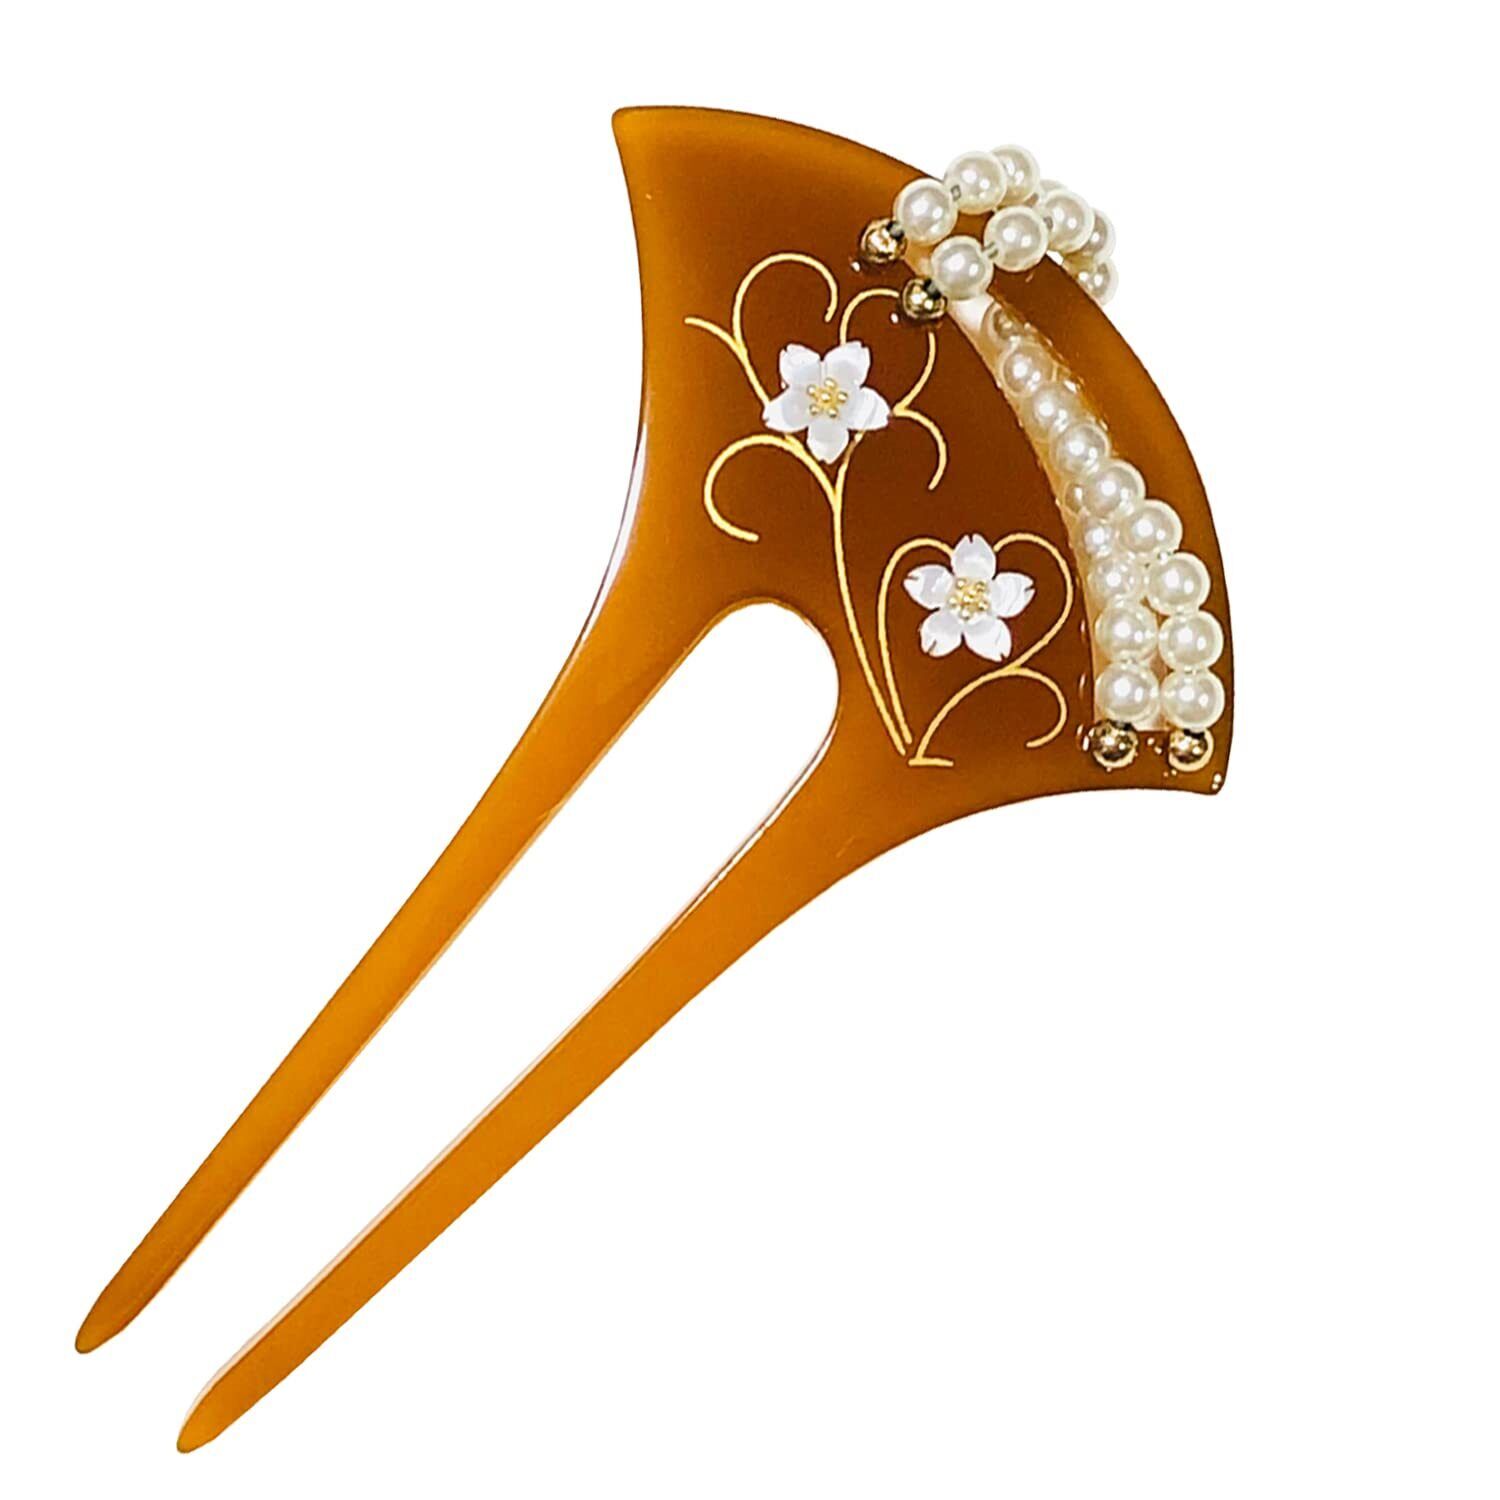 NEW Kanzashi Japanese Hair Ornament Accessory Amber & White Color from Japan